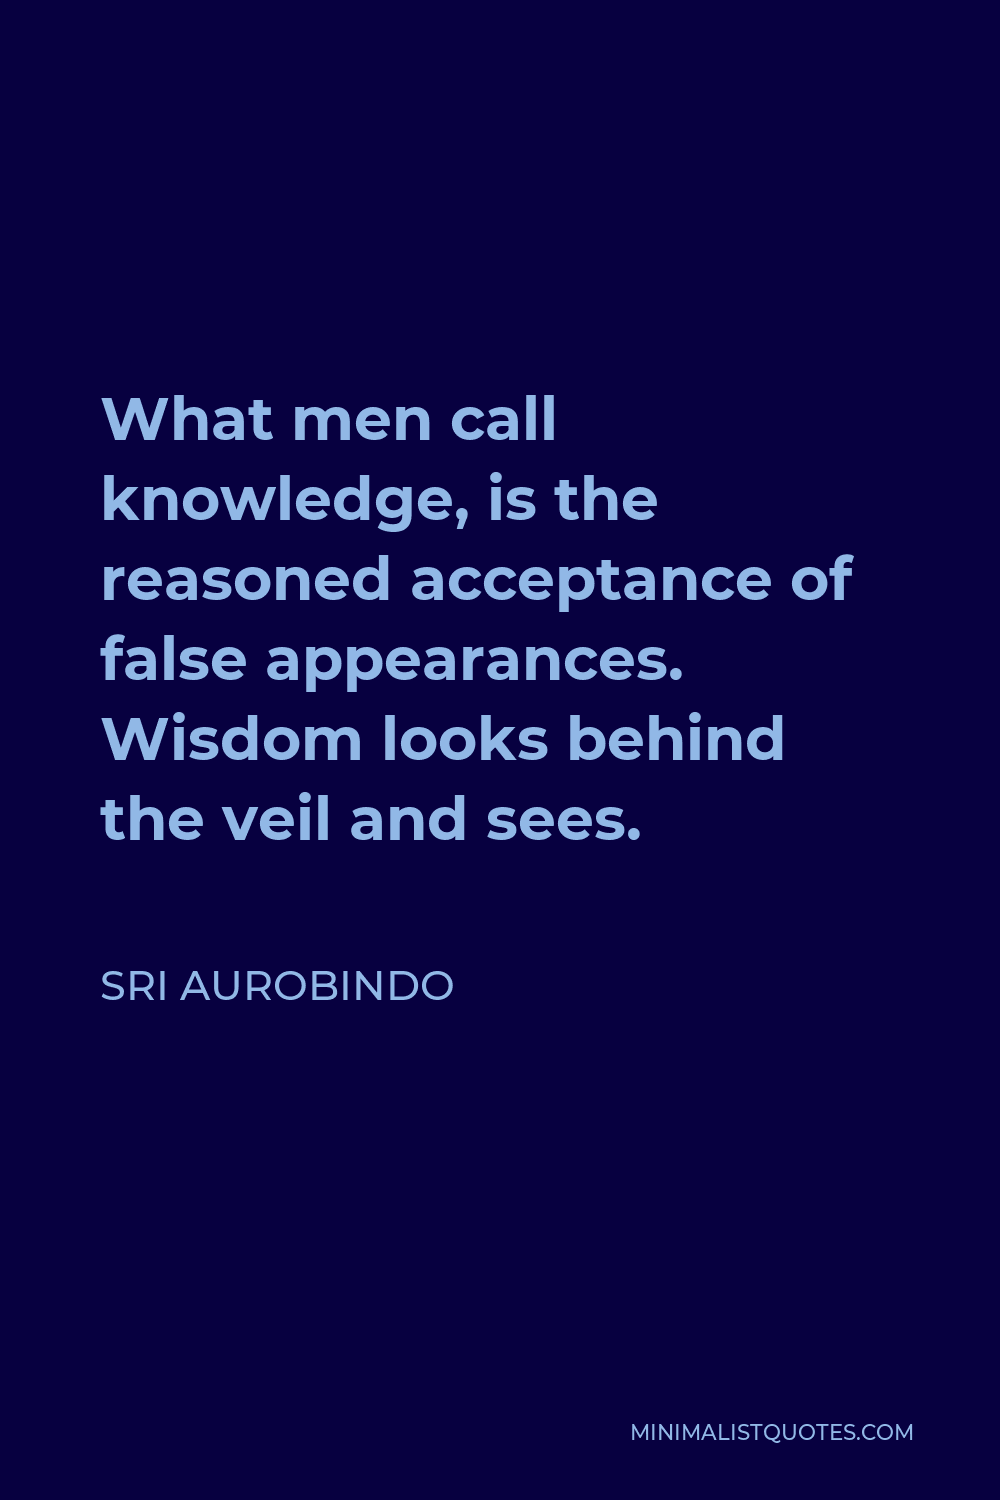 Sri Aurobindo Quote - What men call knowledge, is the reasoned acceptance of false appearances. Wisdom looks behind the veil and sees.